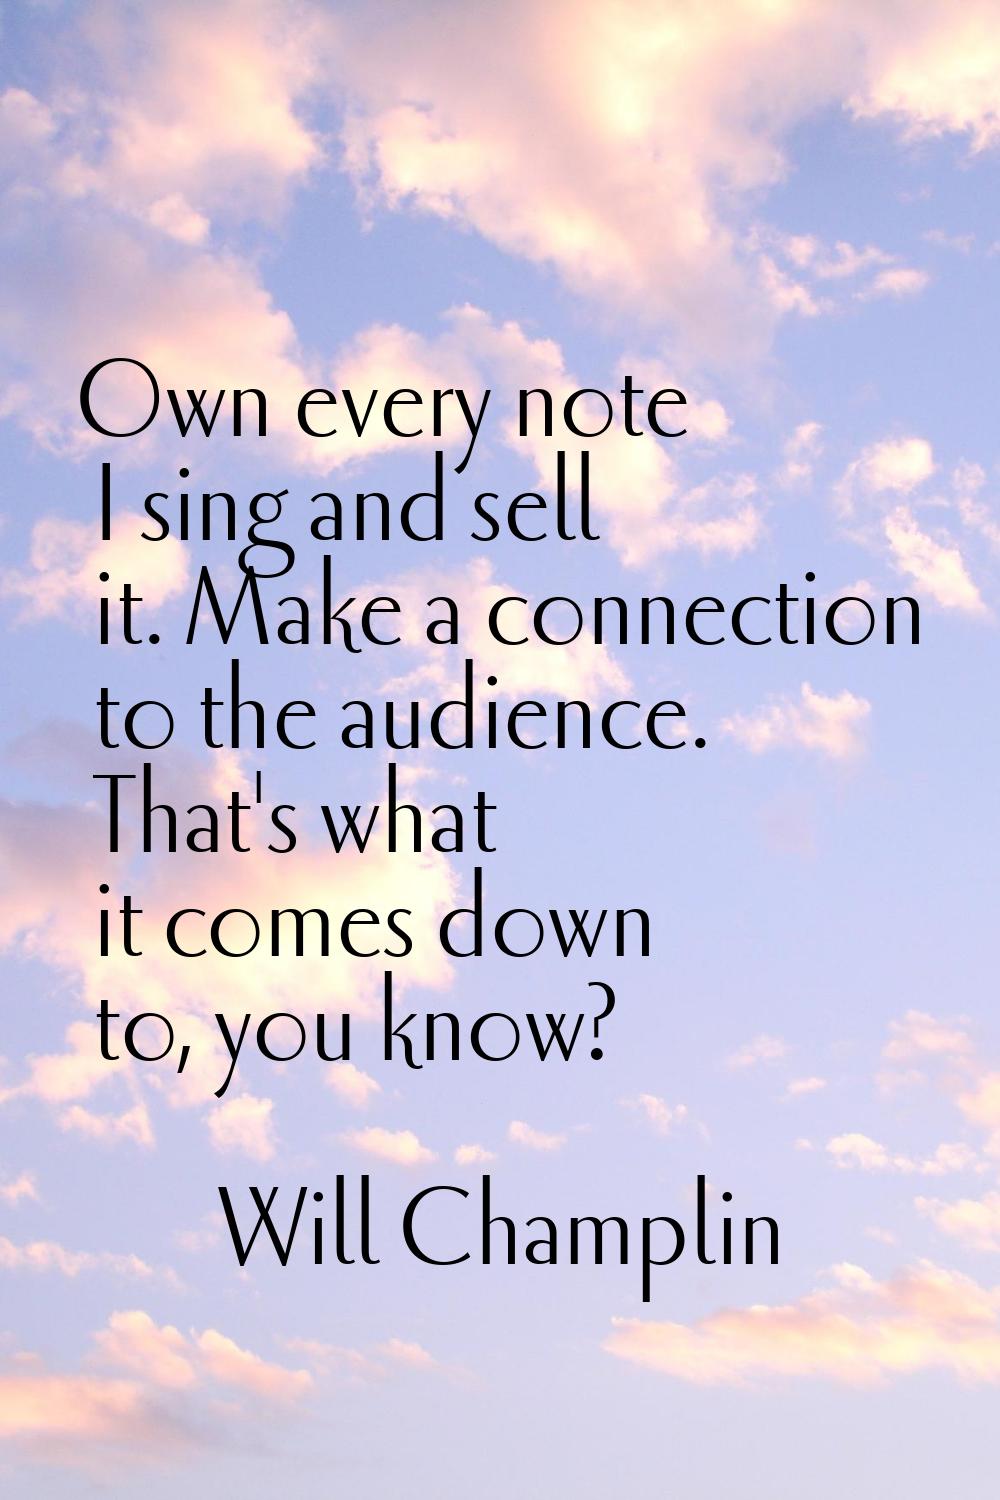 Own every note I sing and sell it. Make a connection to the audience. That's what it comes down to,